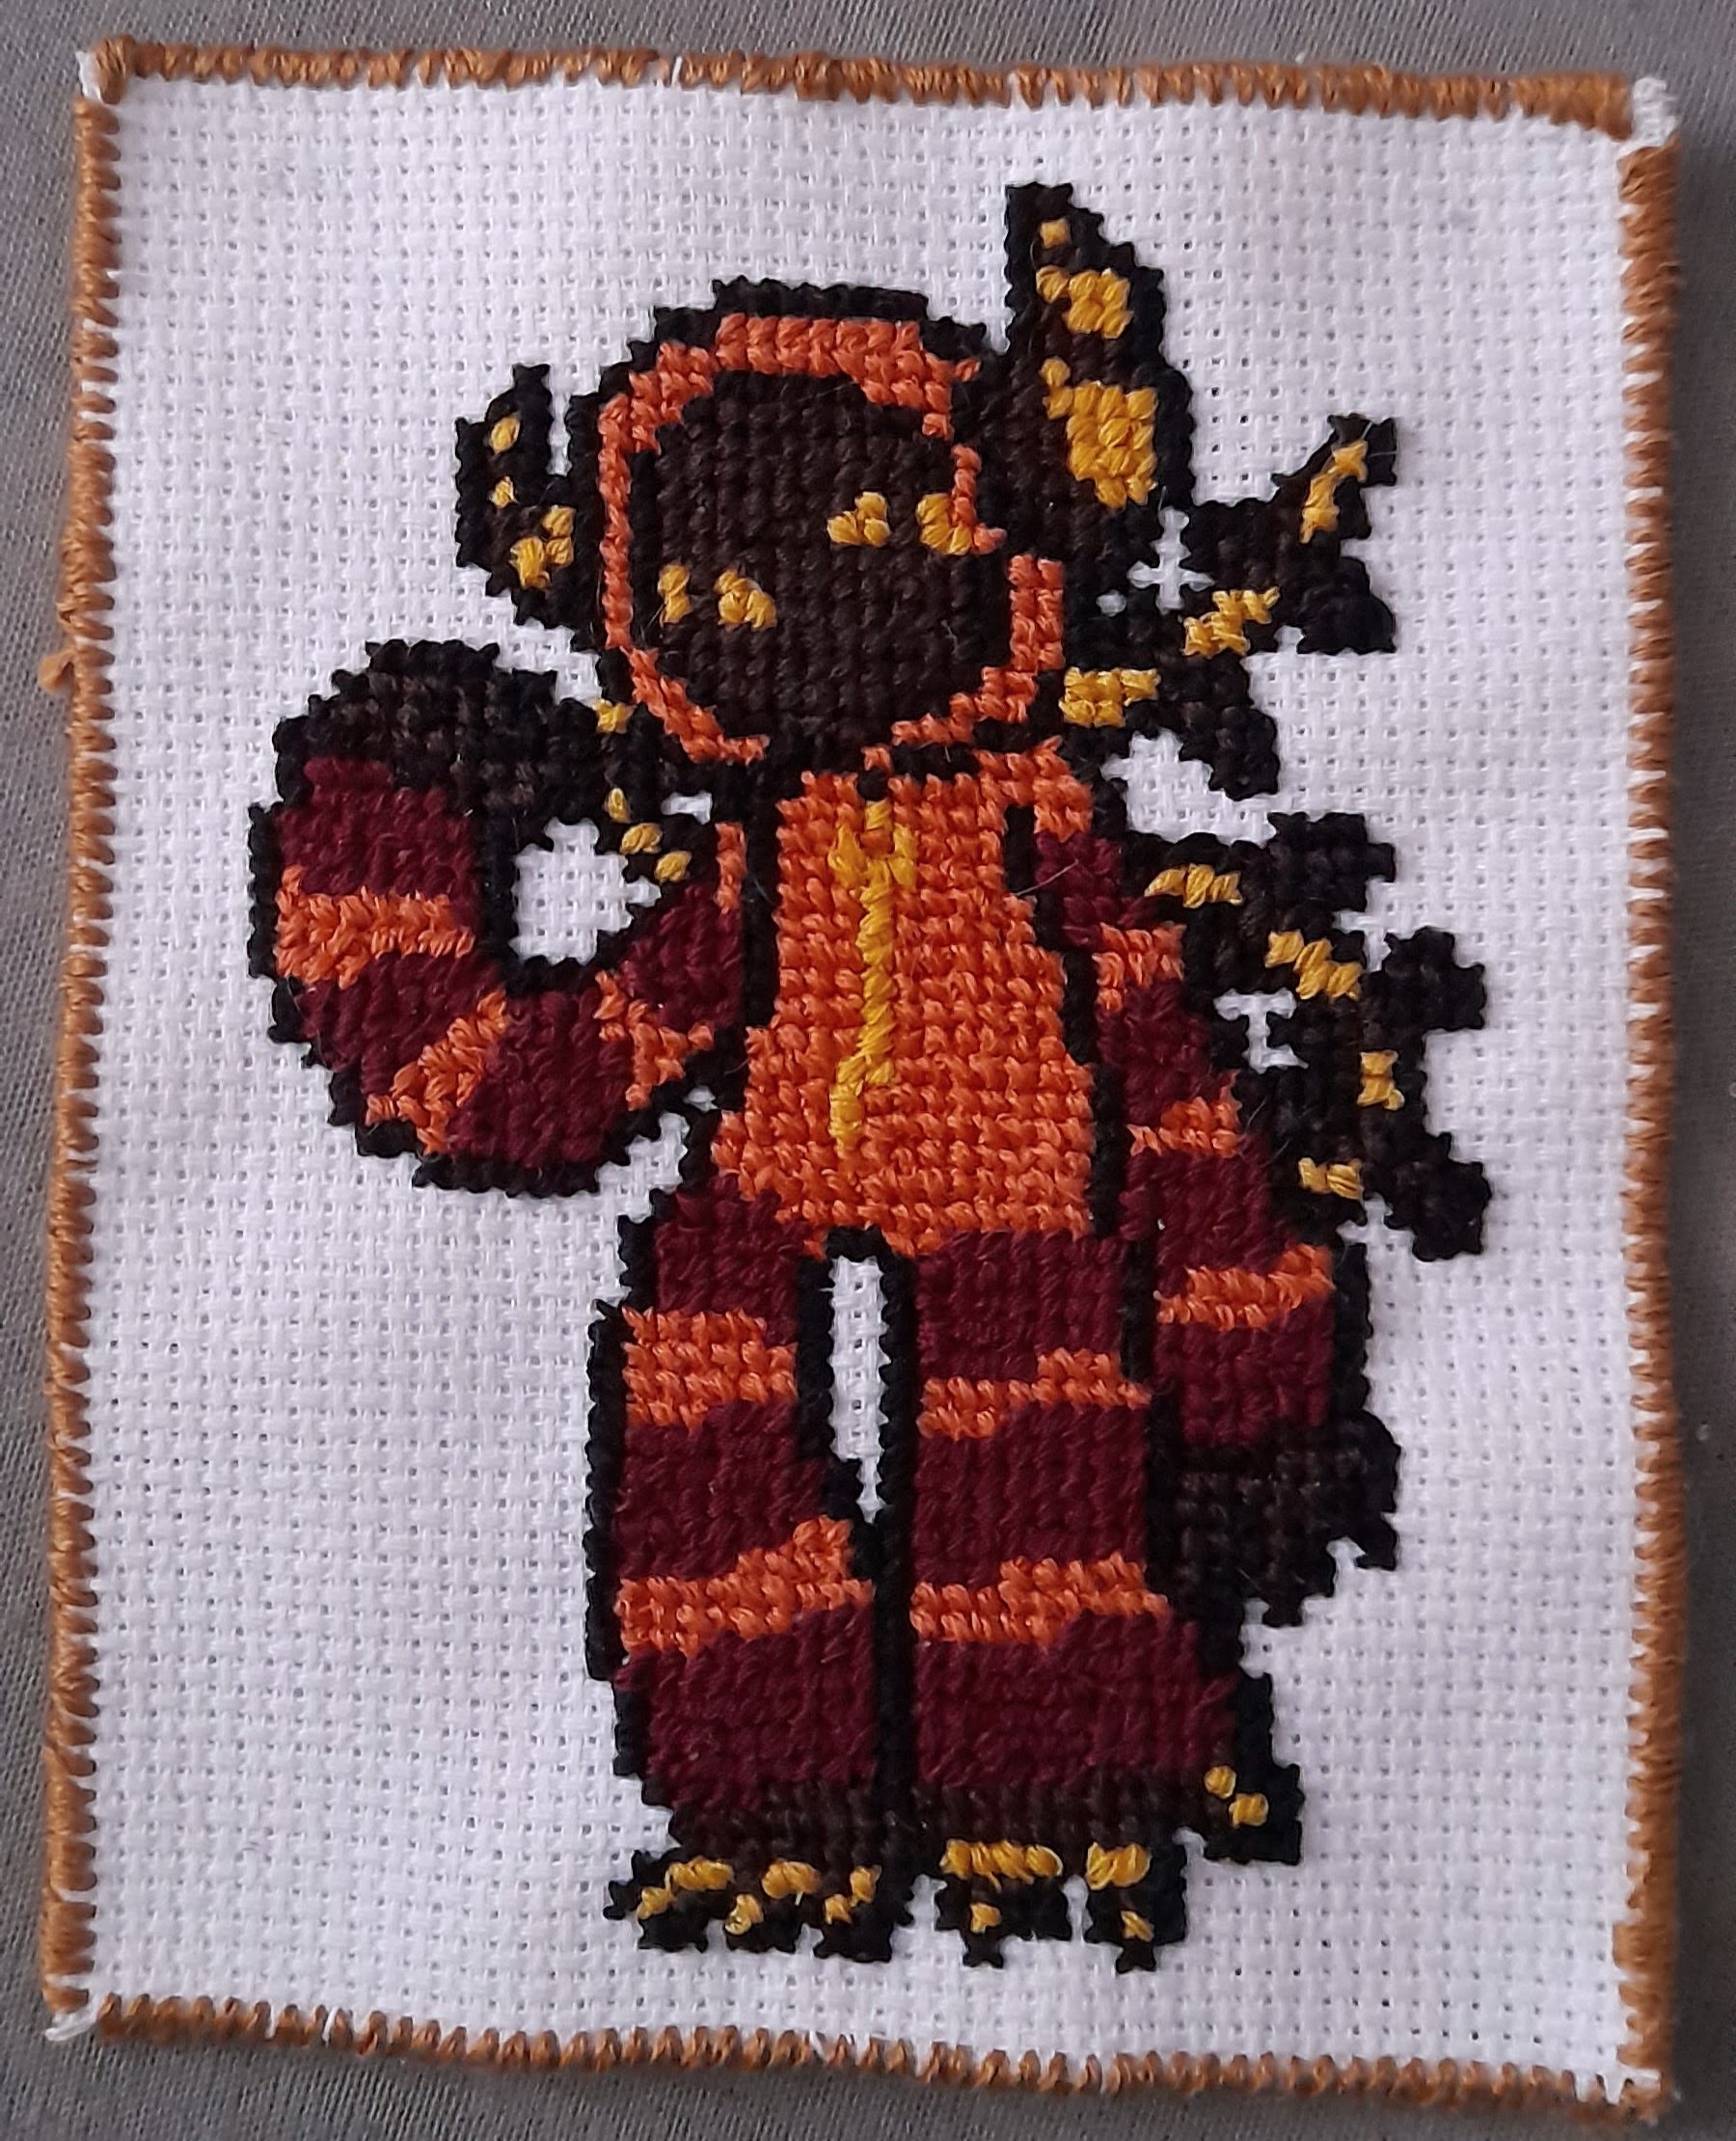 a cross-stitch of clyde